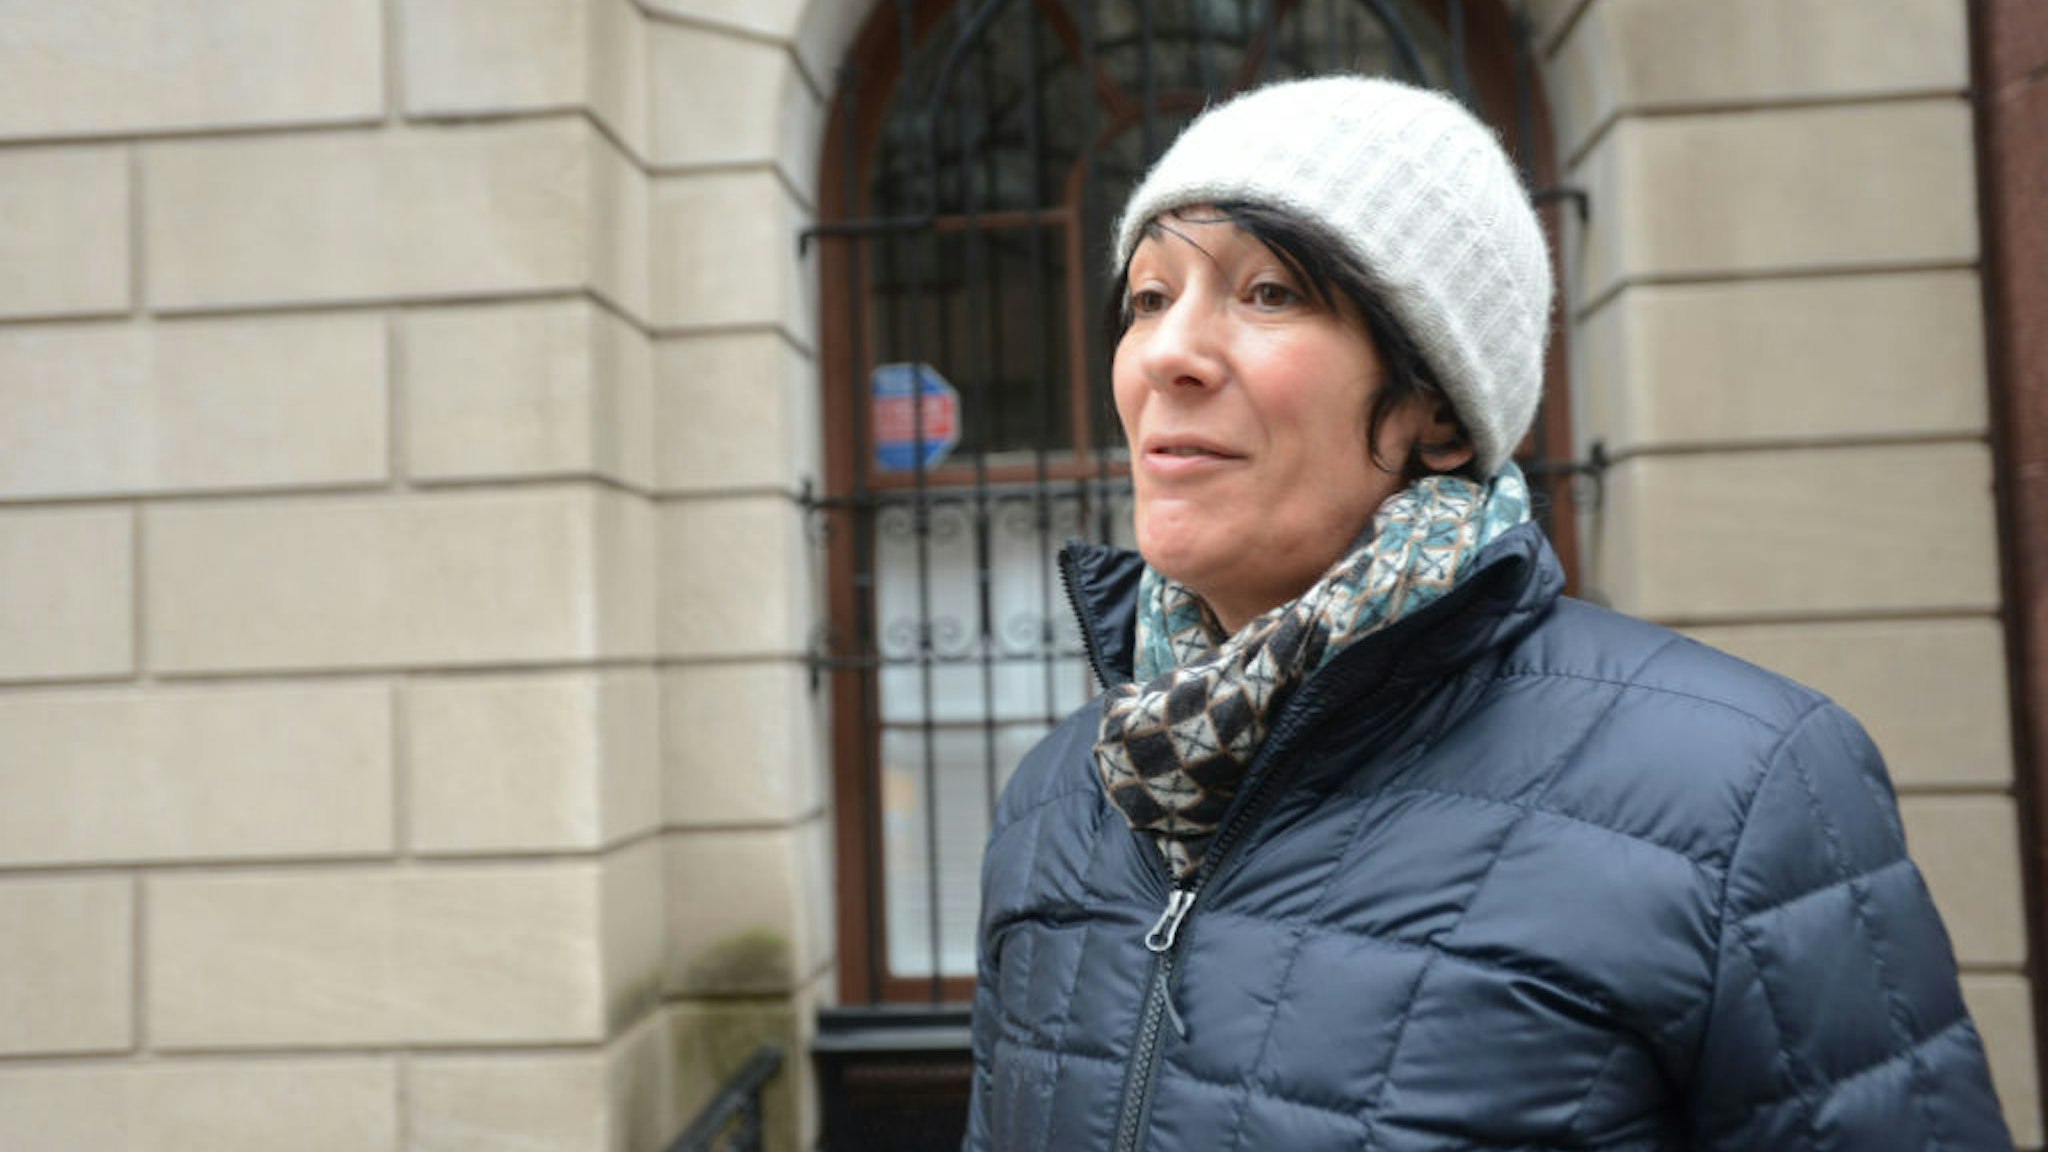 Ghislaine Maxwell, after walking out the side door of her East 65th Street townhouse in Manhattan on Sunday, January 4, 2015.